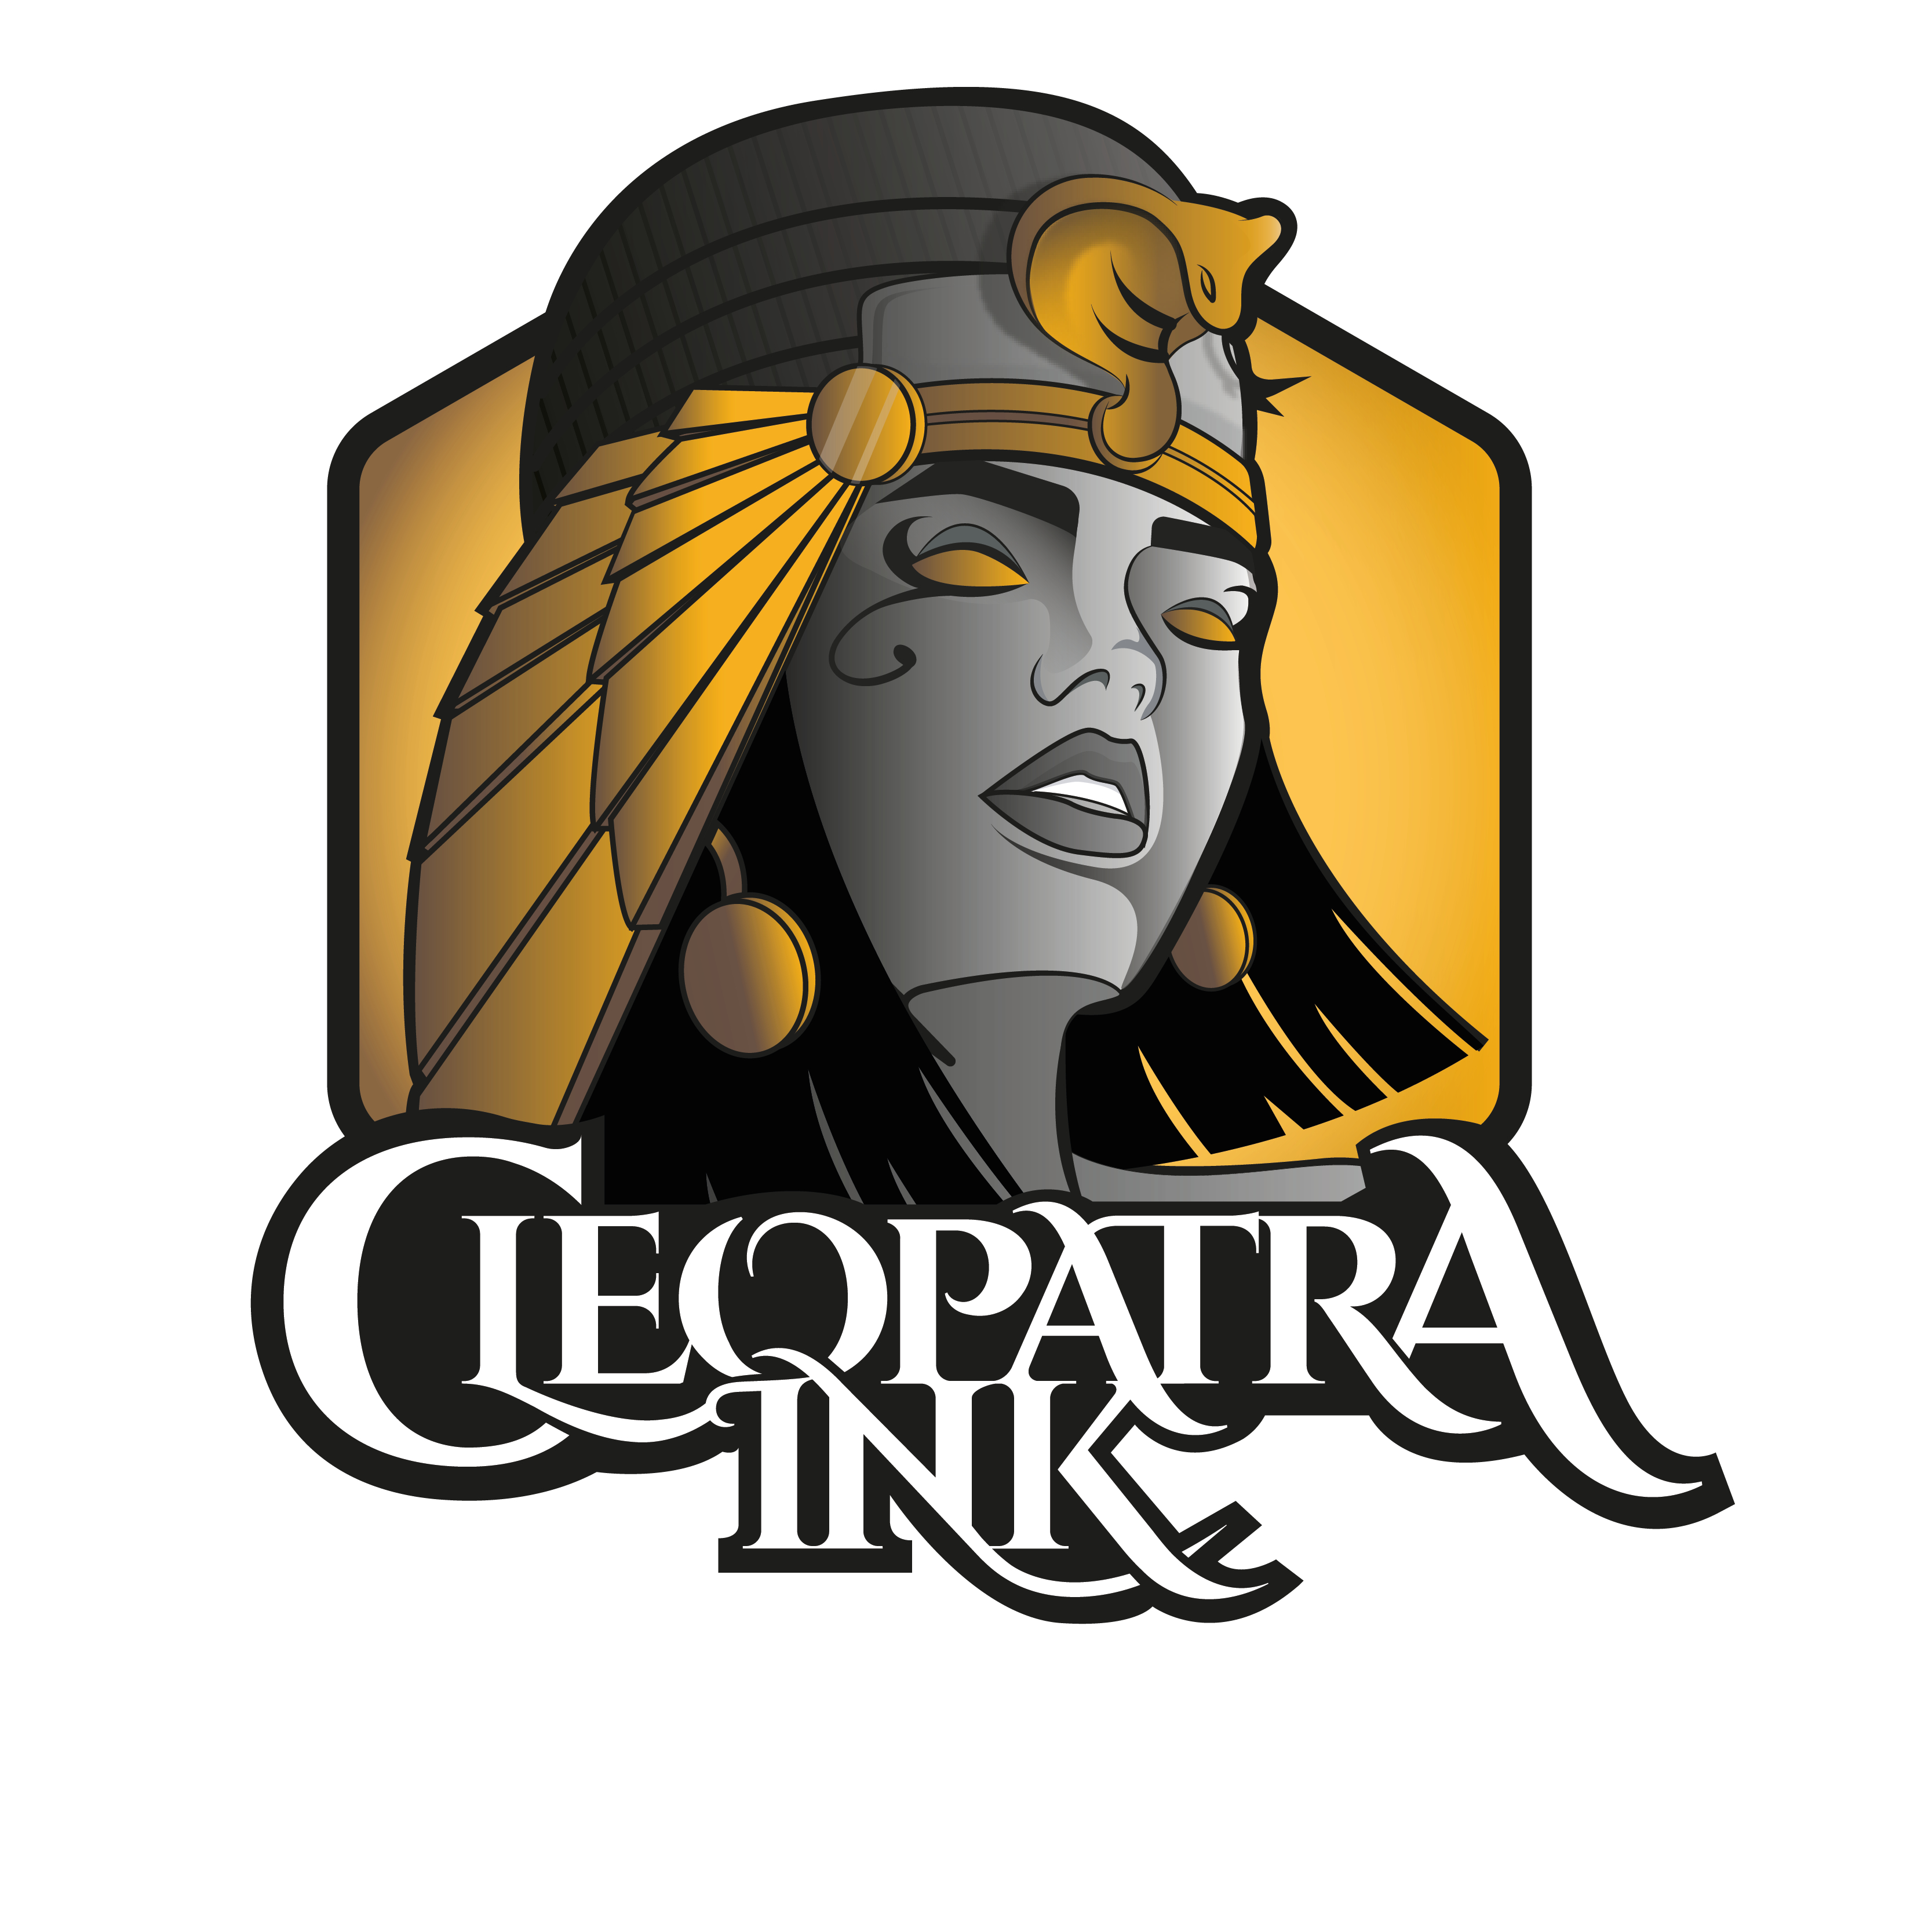 9 hour tattoo called stuck in the past at a tattoo shop called Cleopatra  Ink in Antalya Turkey not my tattoo but when I saw it I thought it  looked amazing 